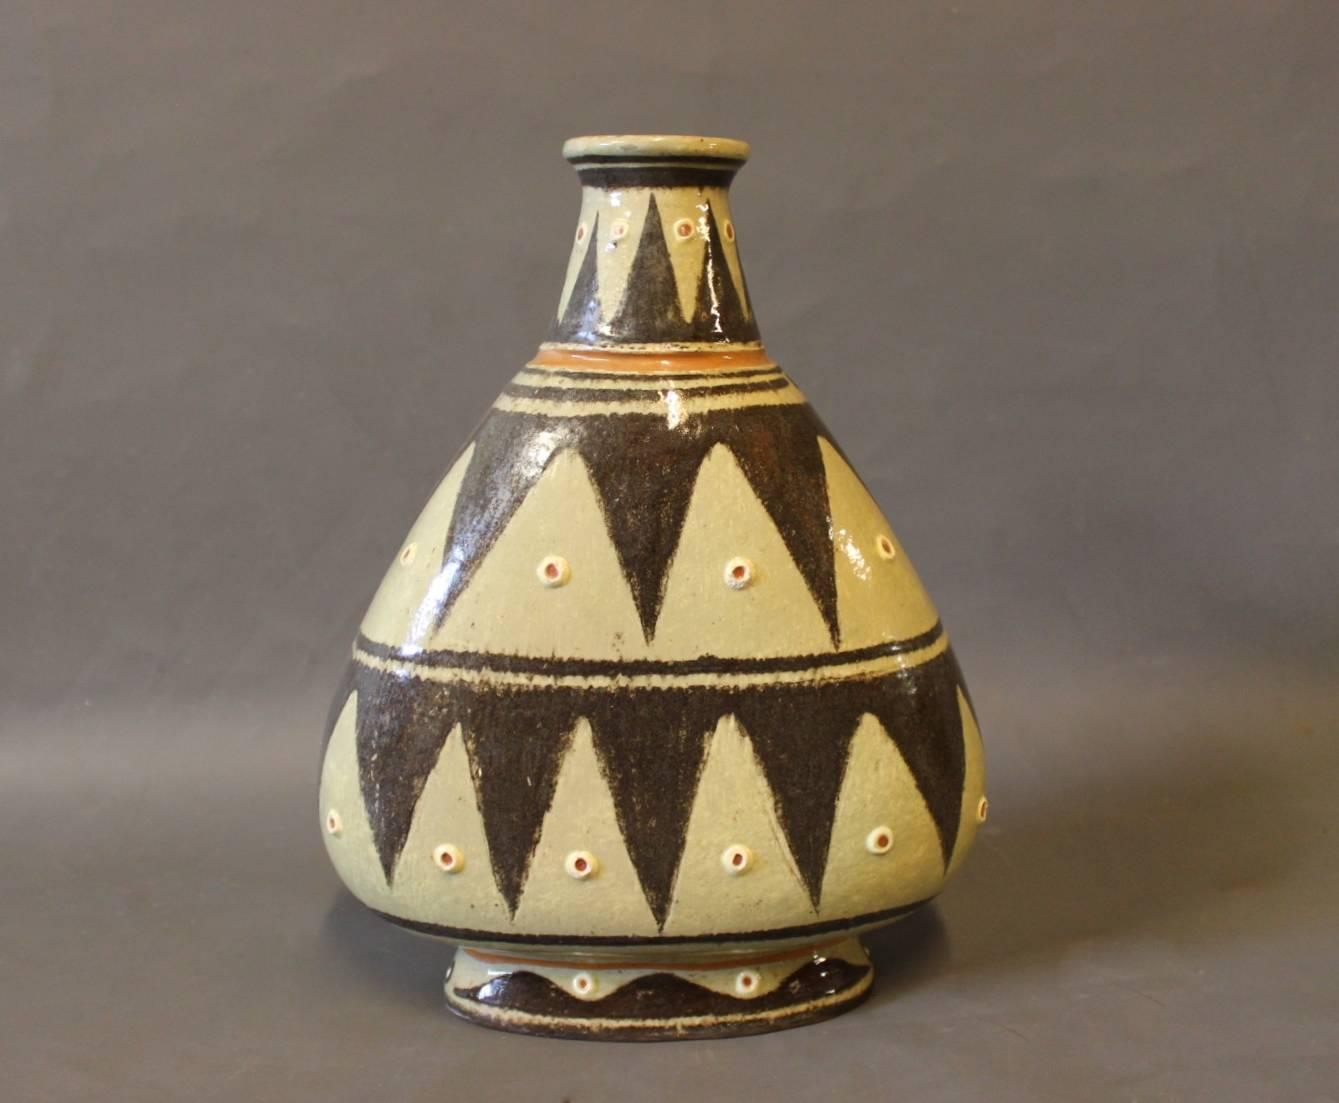 Ceramic vase in edged pattern in brown and light colours. The vase is of Danish design and from the 1960s.